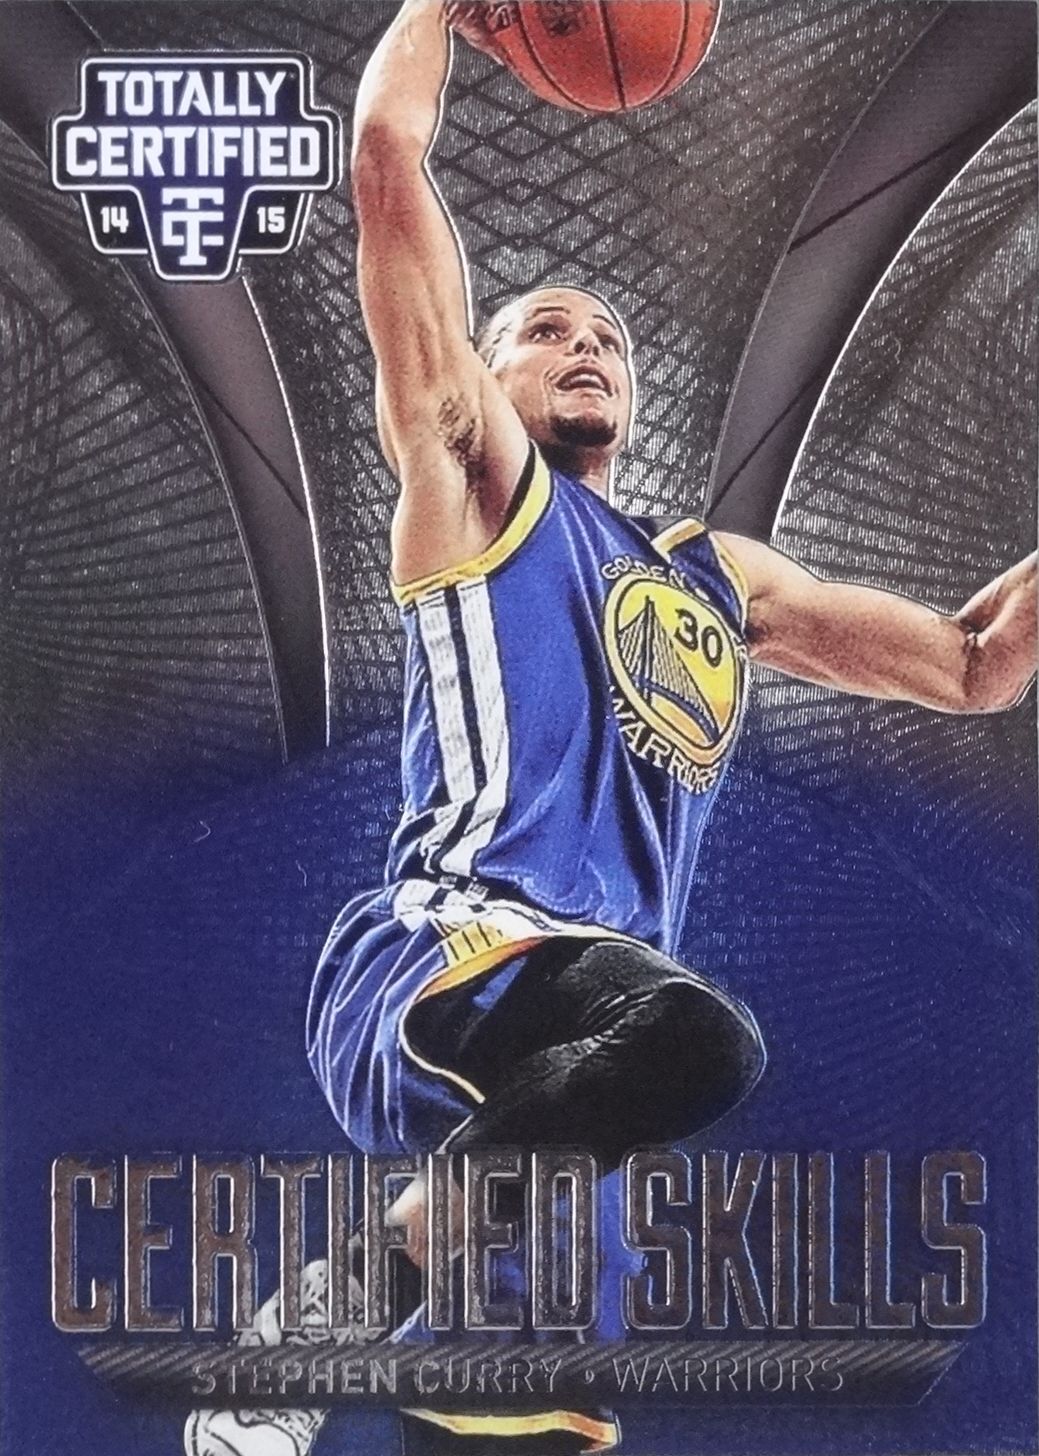 2014-15 Totally Certified Skills #2 Stephen Curry 299 - Front.JPG